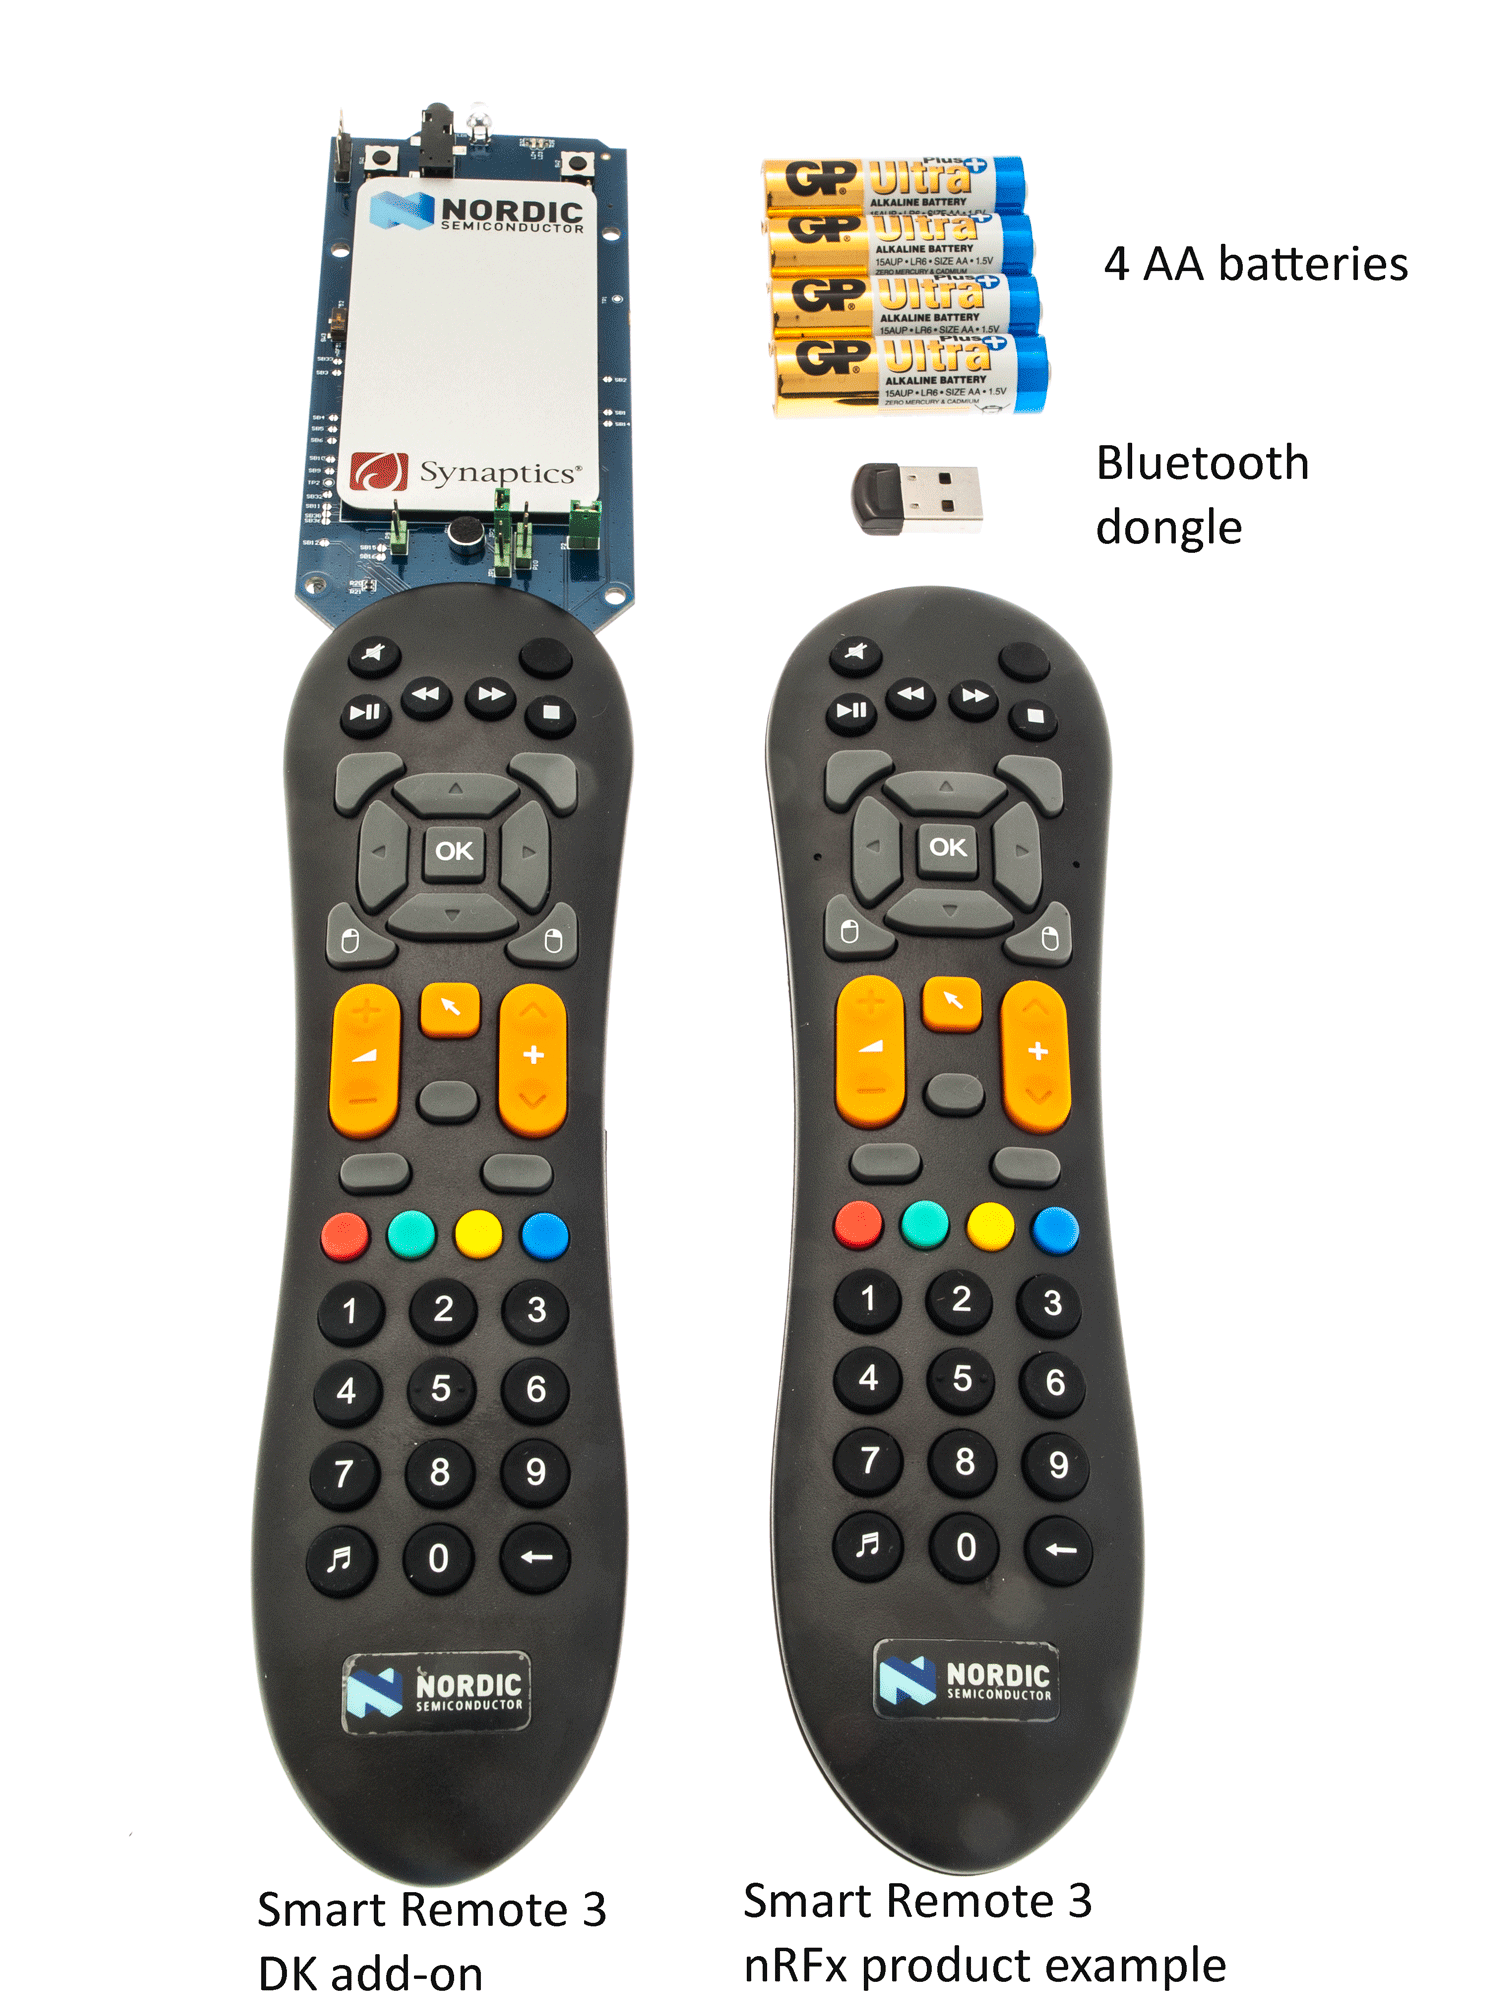 Photo of nRFready Smart Remote 3 reference design hardware